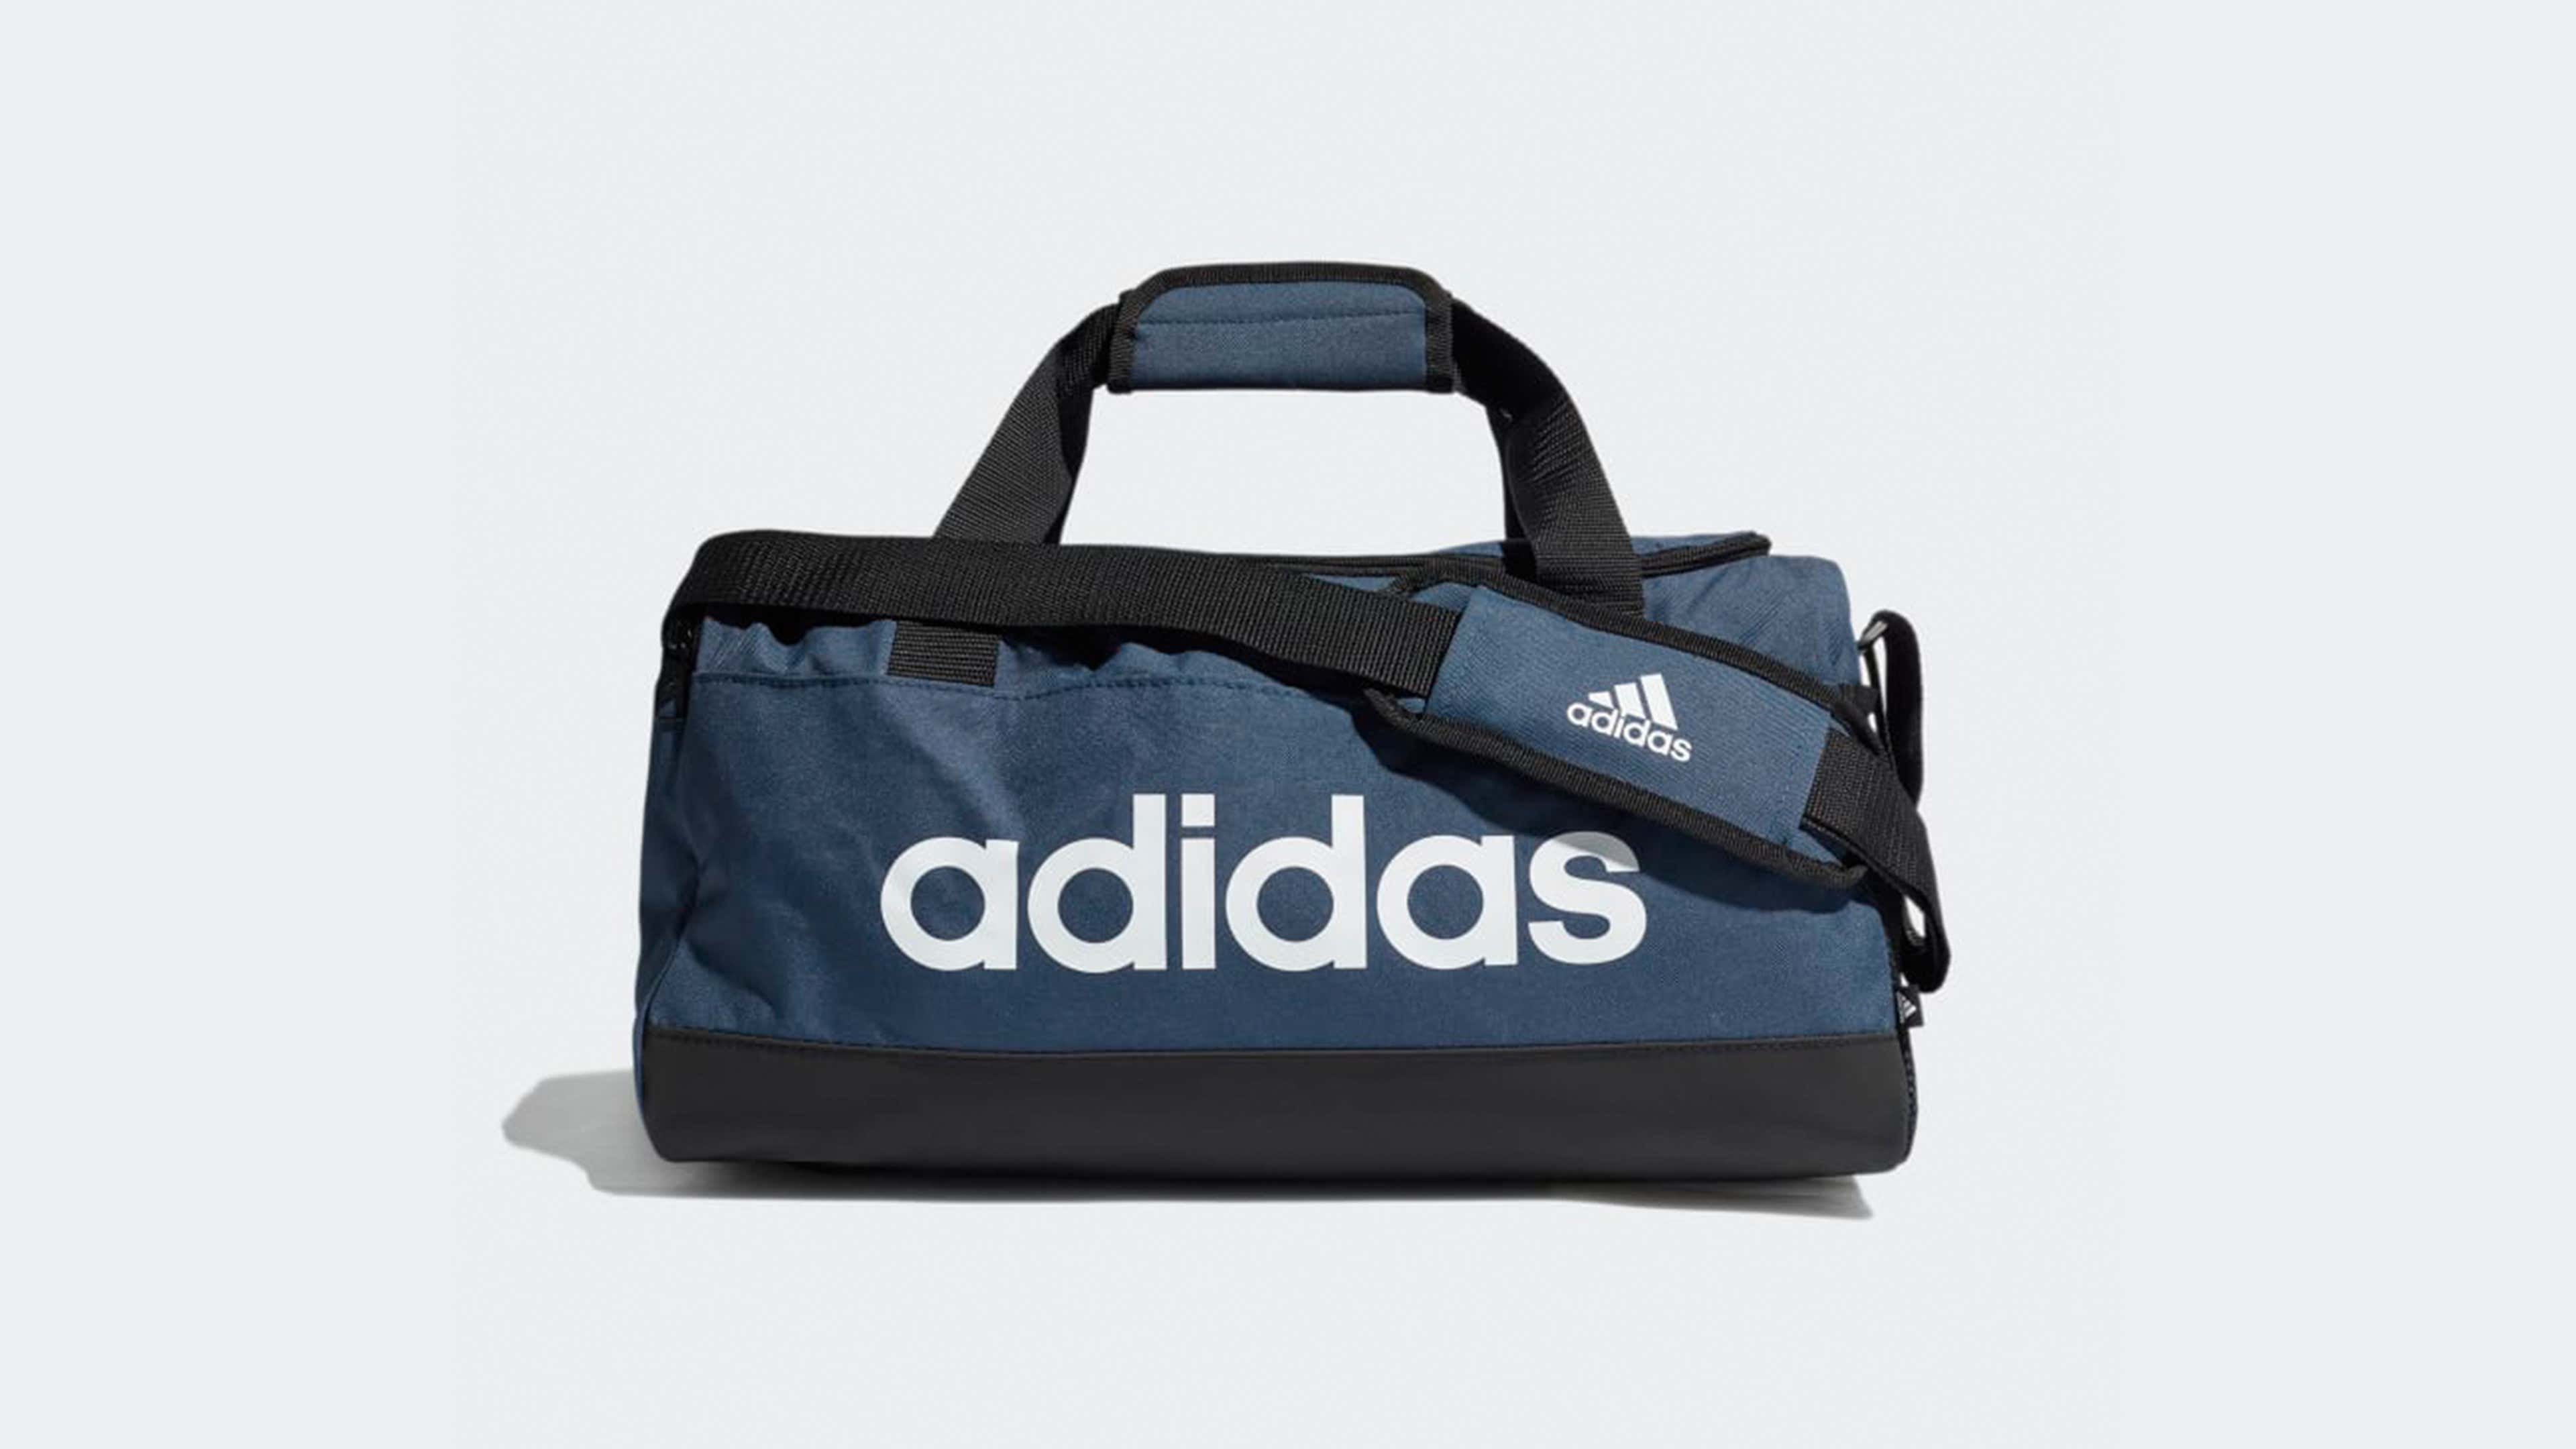 Best gym bags to carry all your fitness gear - Mirror Online